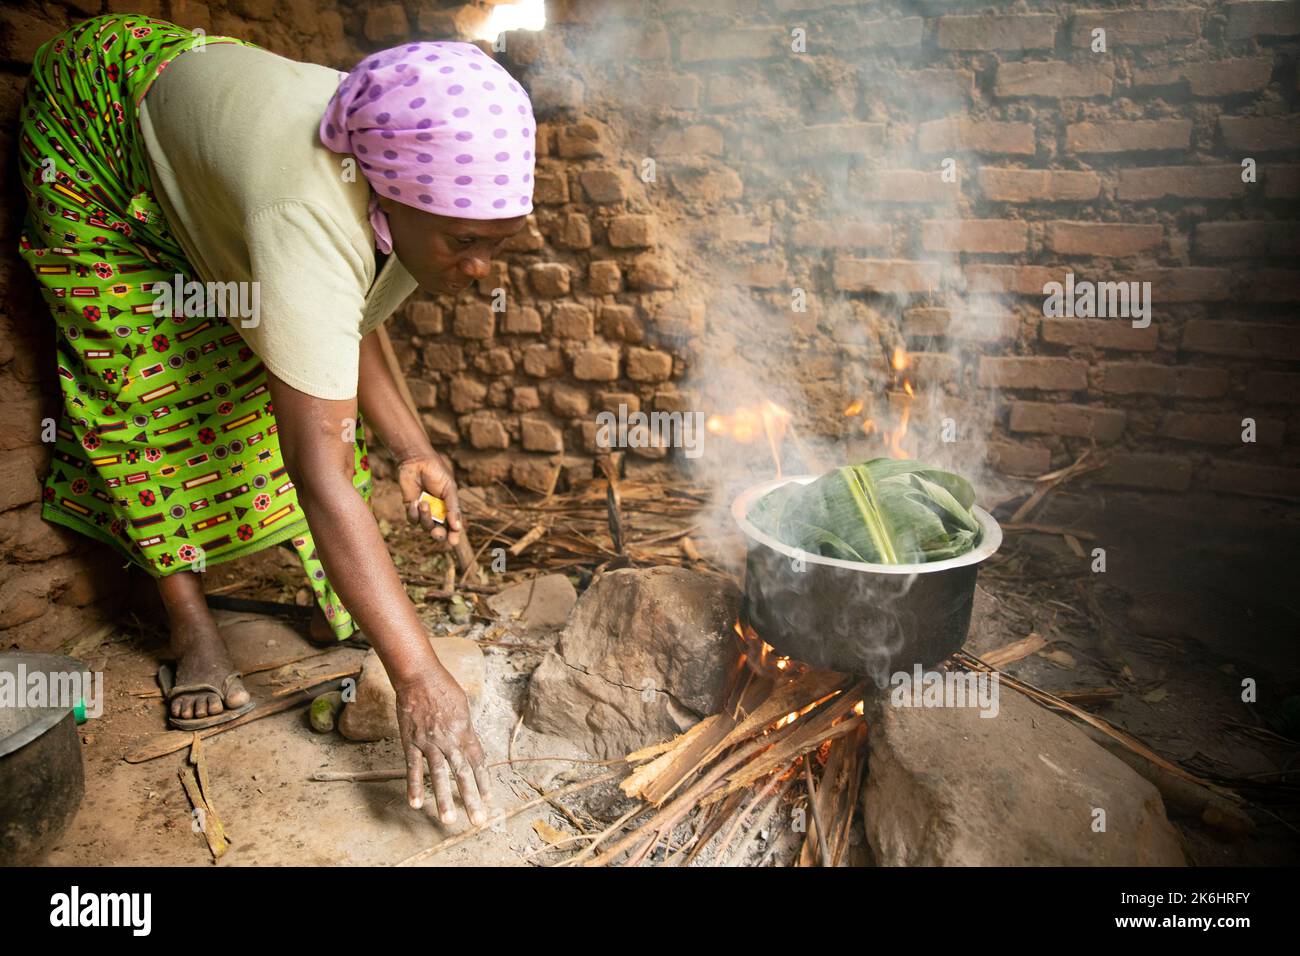 Banana leaves are used to wrap and steam food over a smokey open fire by a woman in Kasese District, Uganda, East Africa. Stock Photo